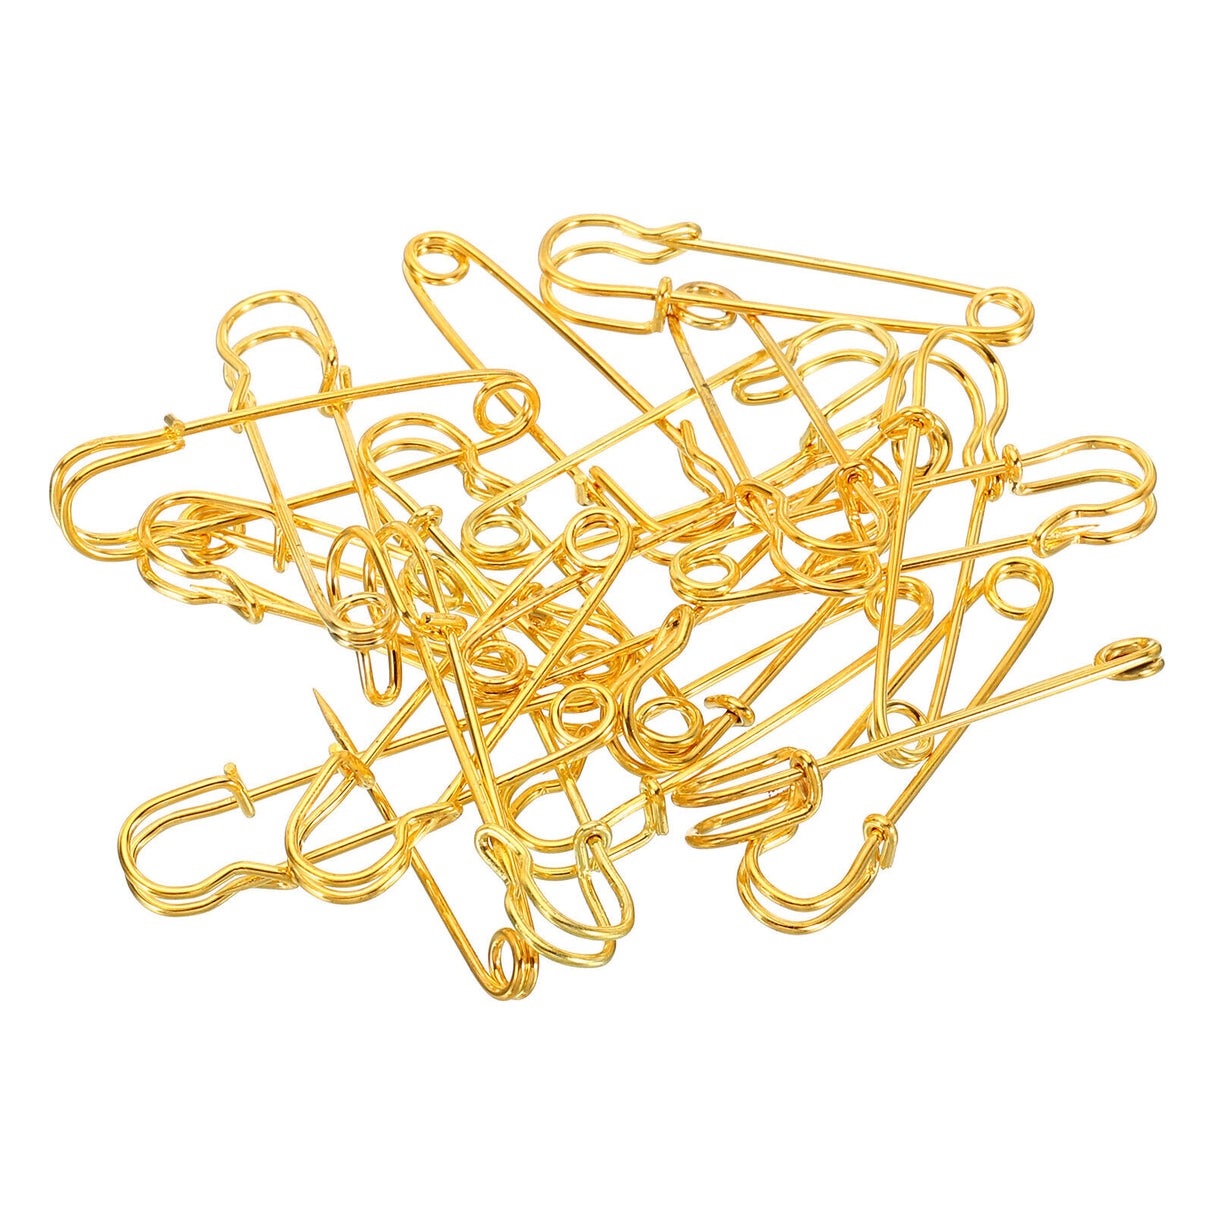 Safety Pins for NYPD badges Large Metal Pins Gold 2.99*0.63"